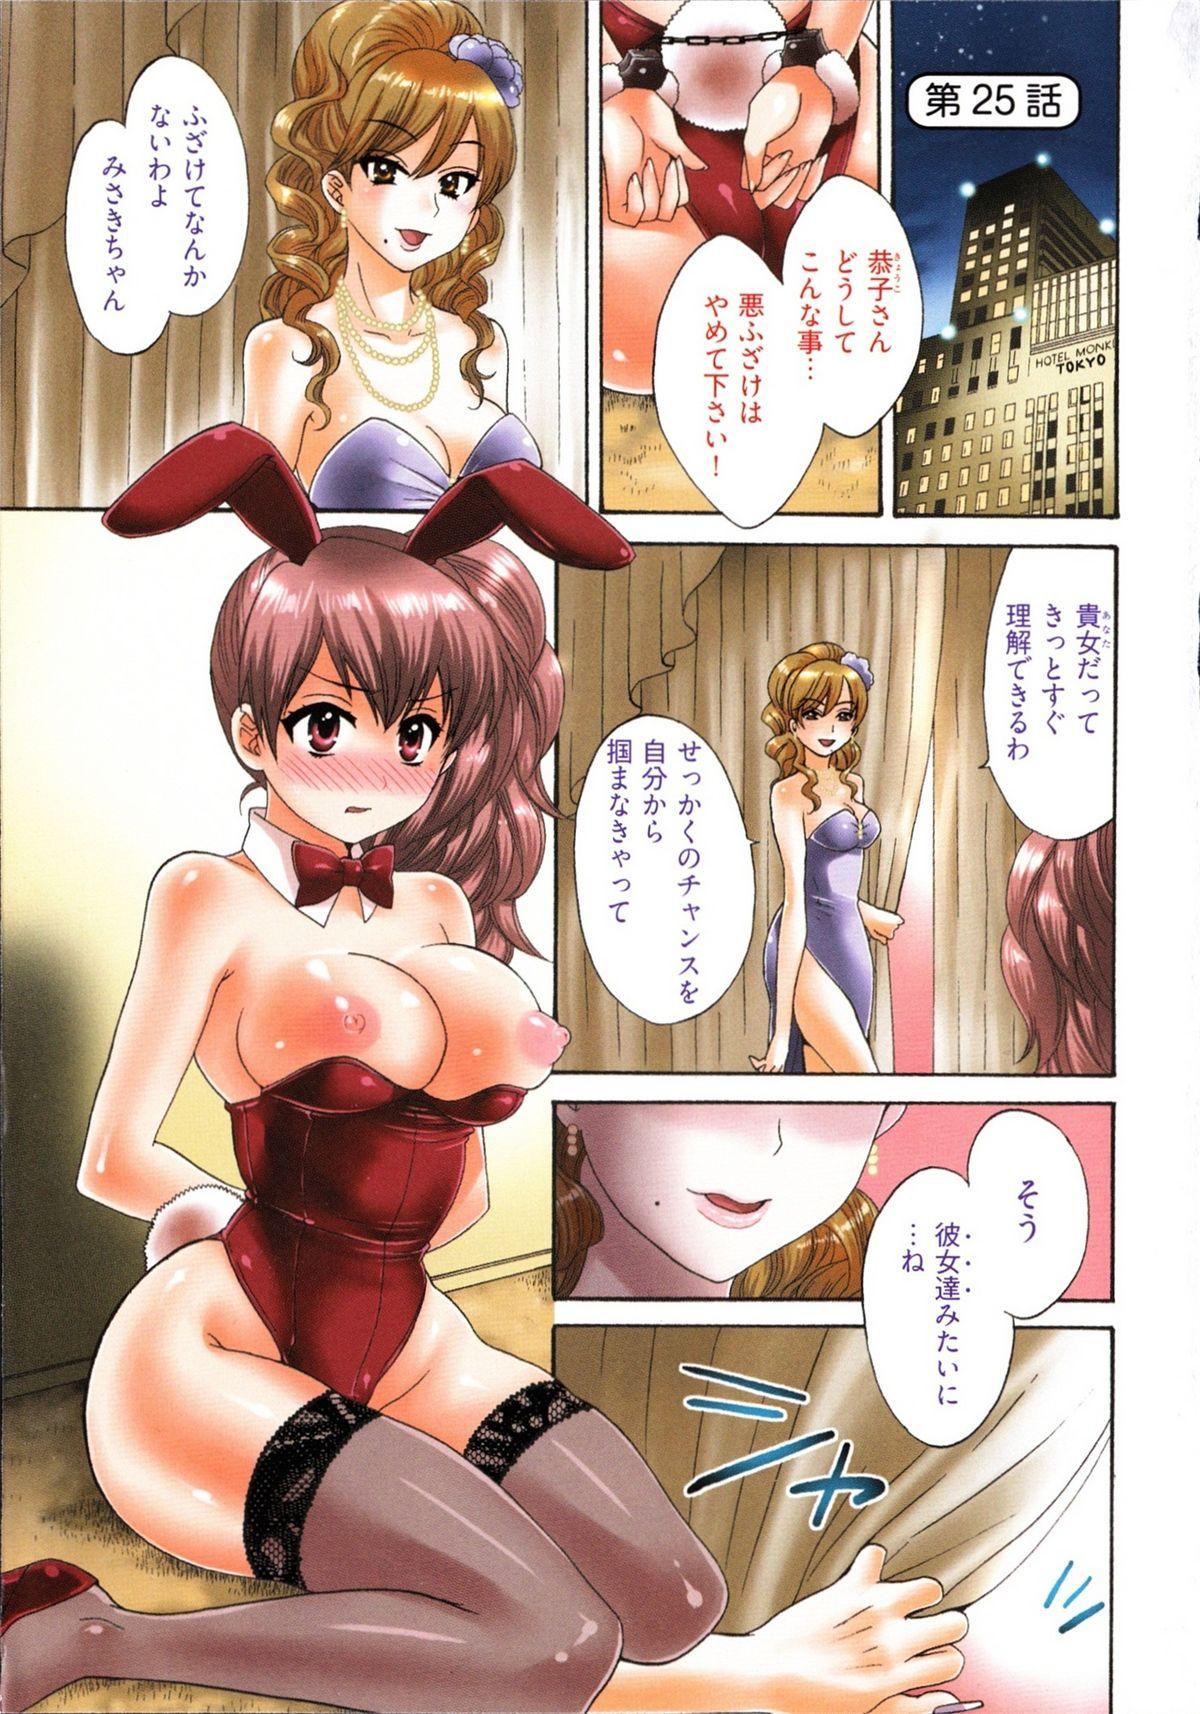 Lick Tenshi no Marshmallow 4 Spreading - Page 3